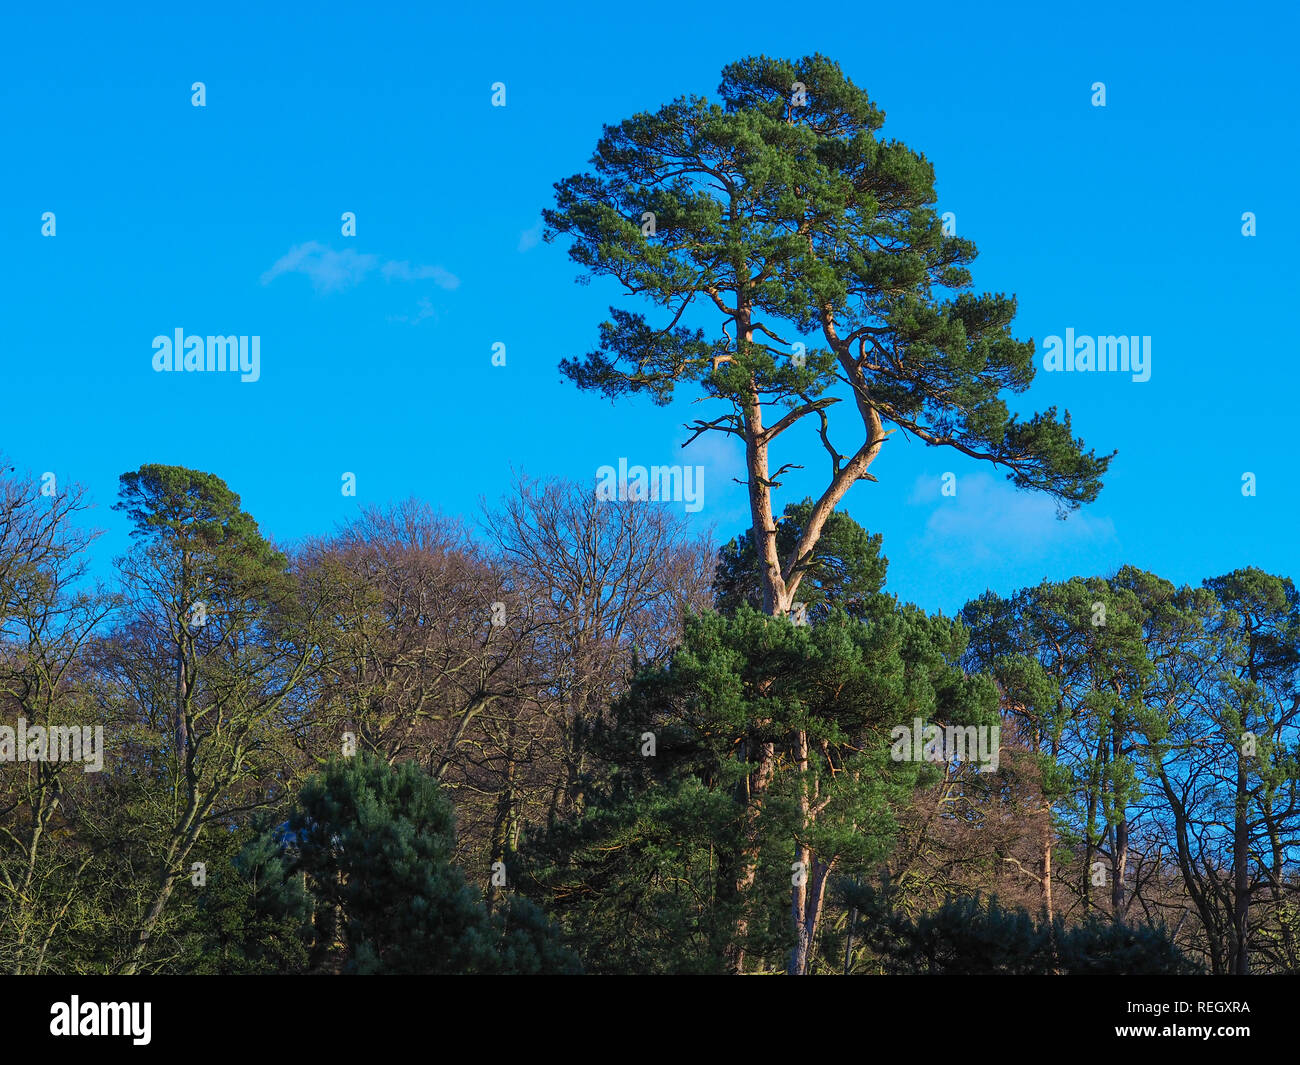 Tall pine tree towering above other trees in a wood with a vivid blue sky Stock Photo